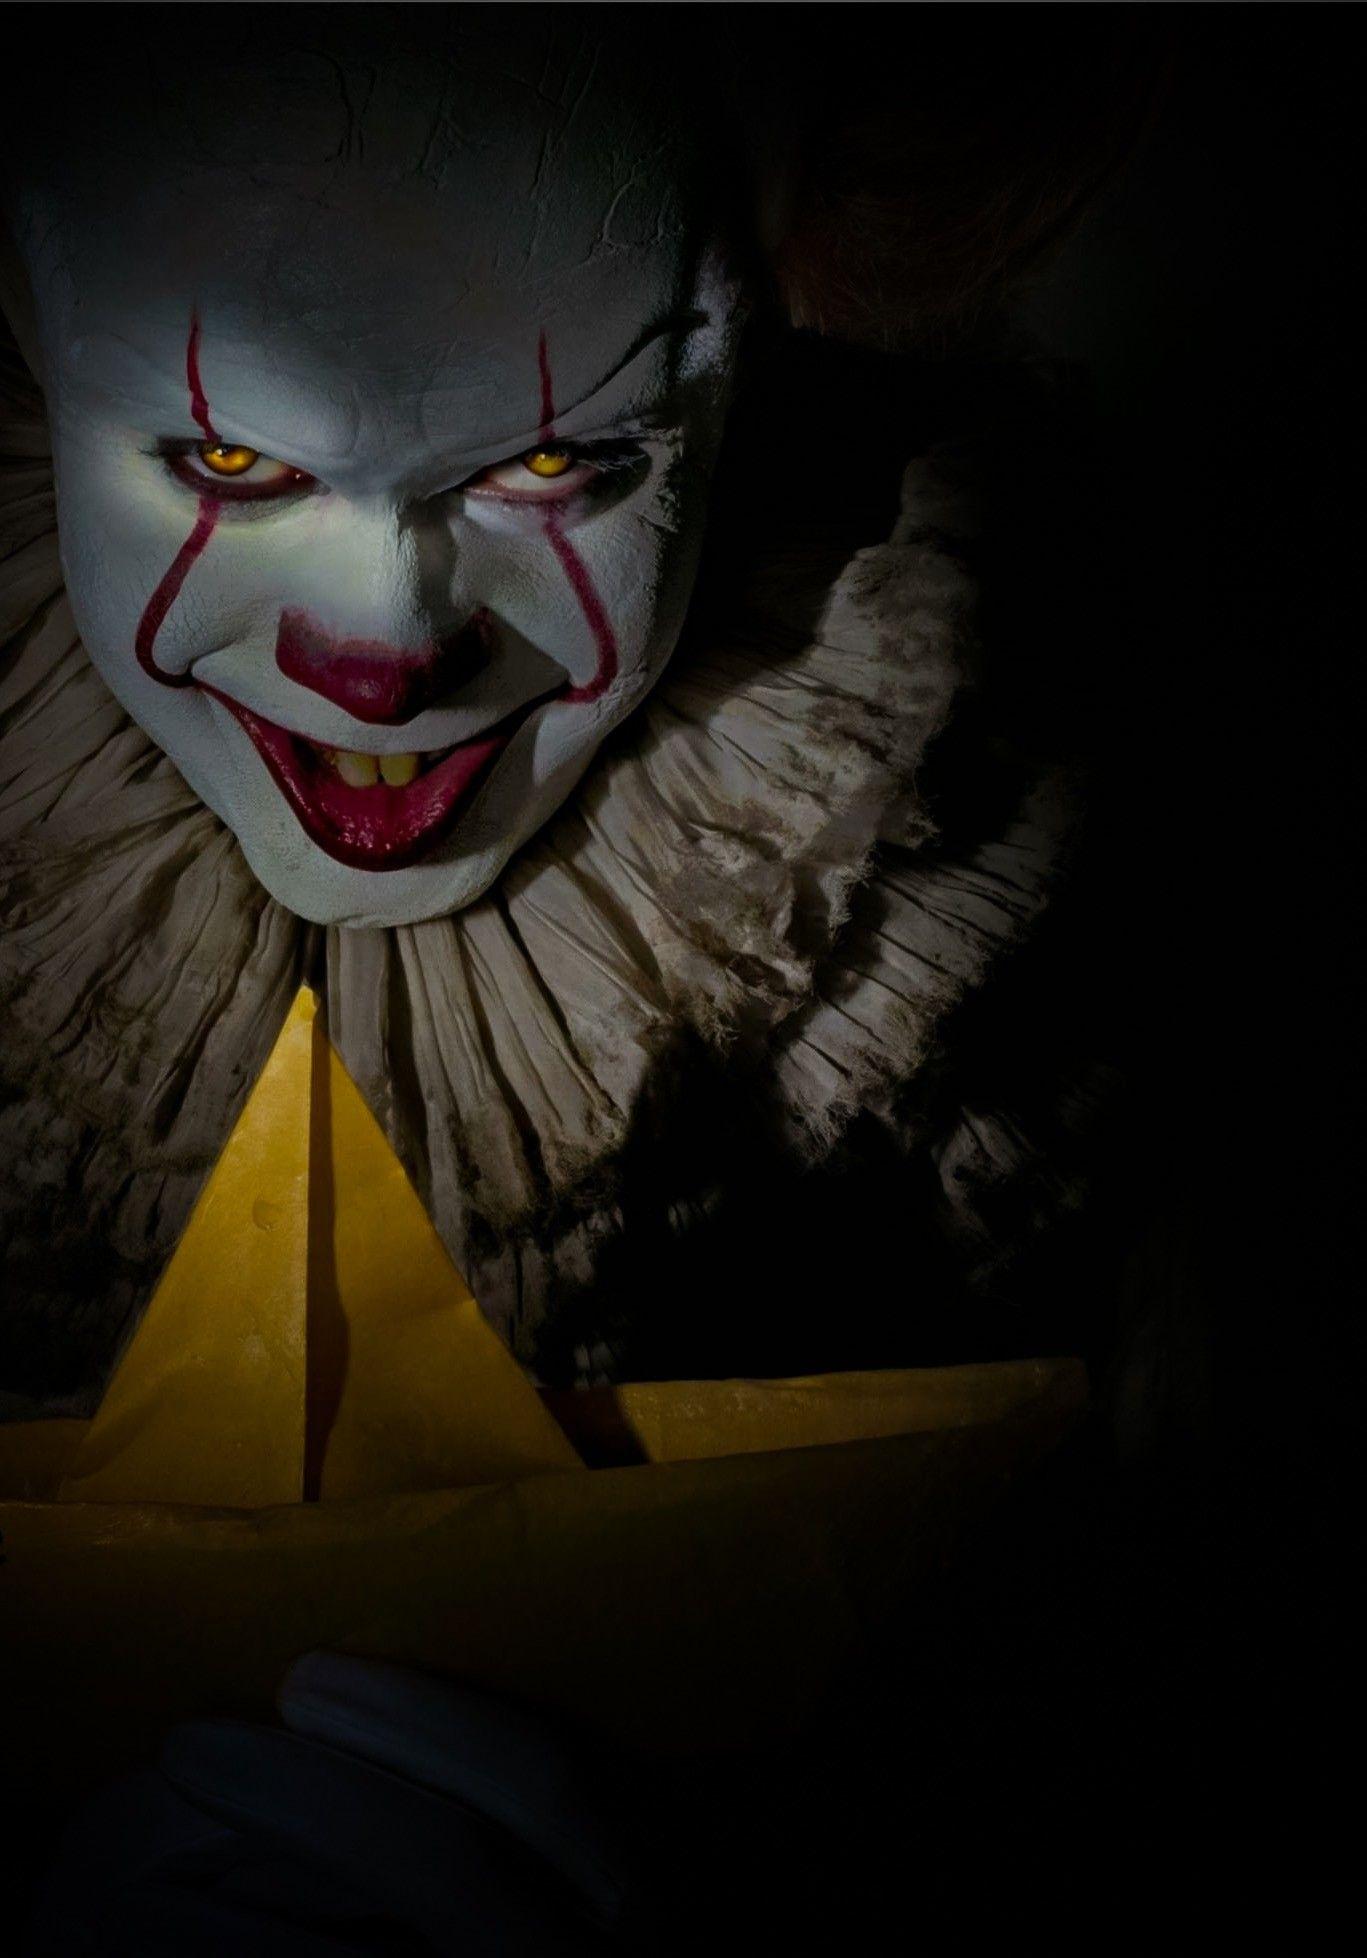 Pennywise the Clown Wallpaper